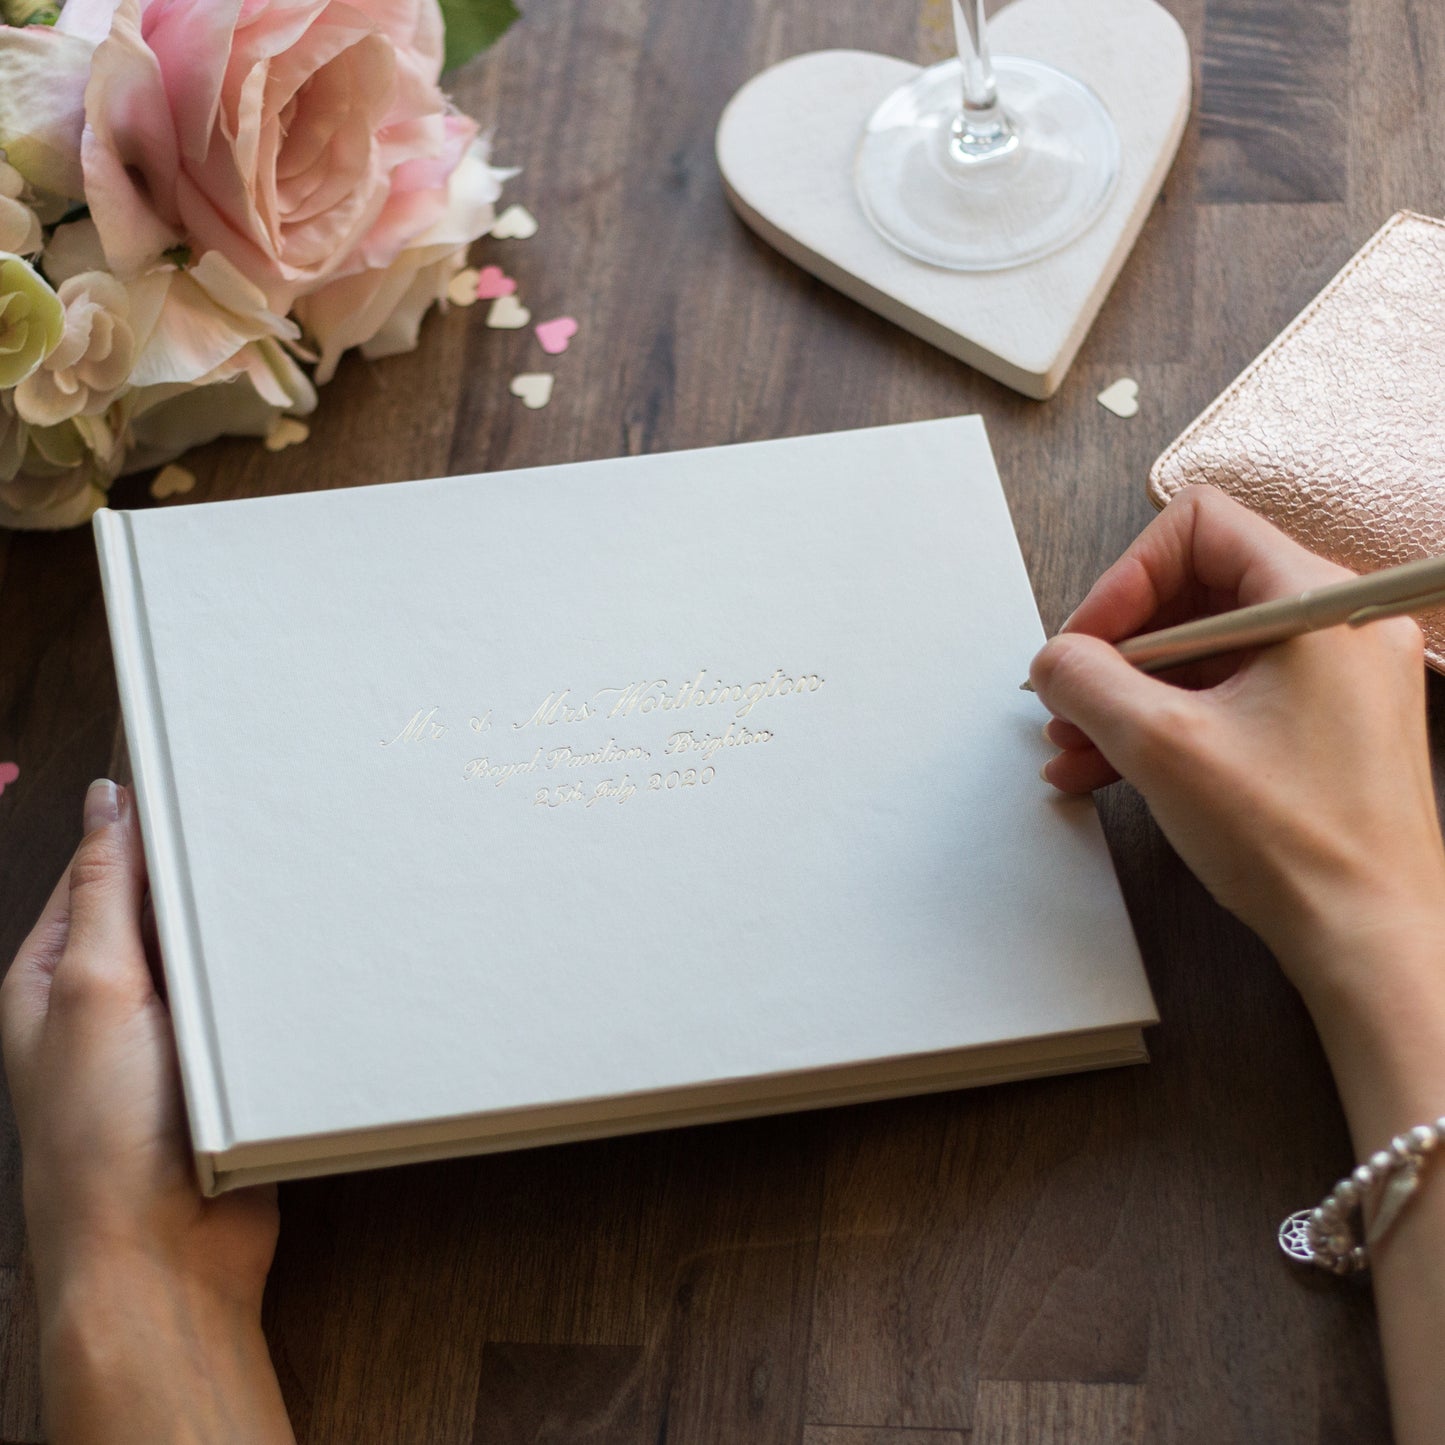 a wedding guest book is on a table and someone is about to sign it. The wedding guest book has been printed on the front with a calligraphy font. the printing says someone's wedding details 